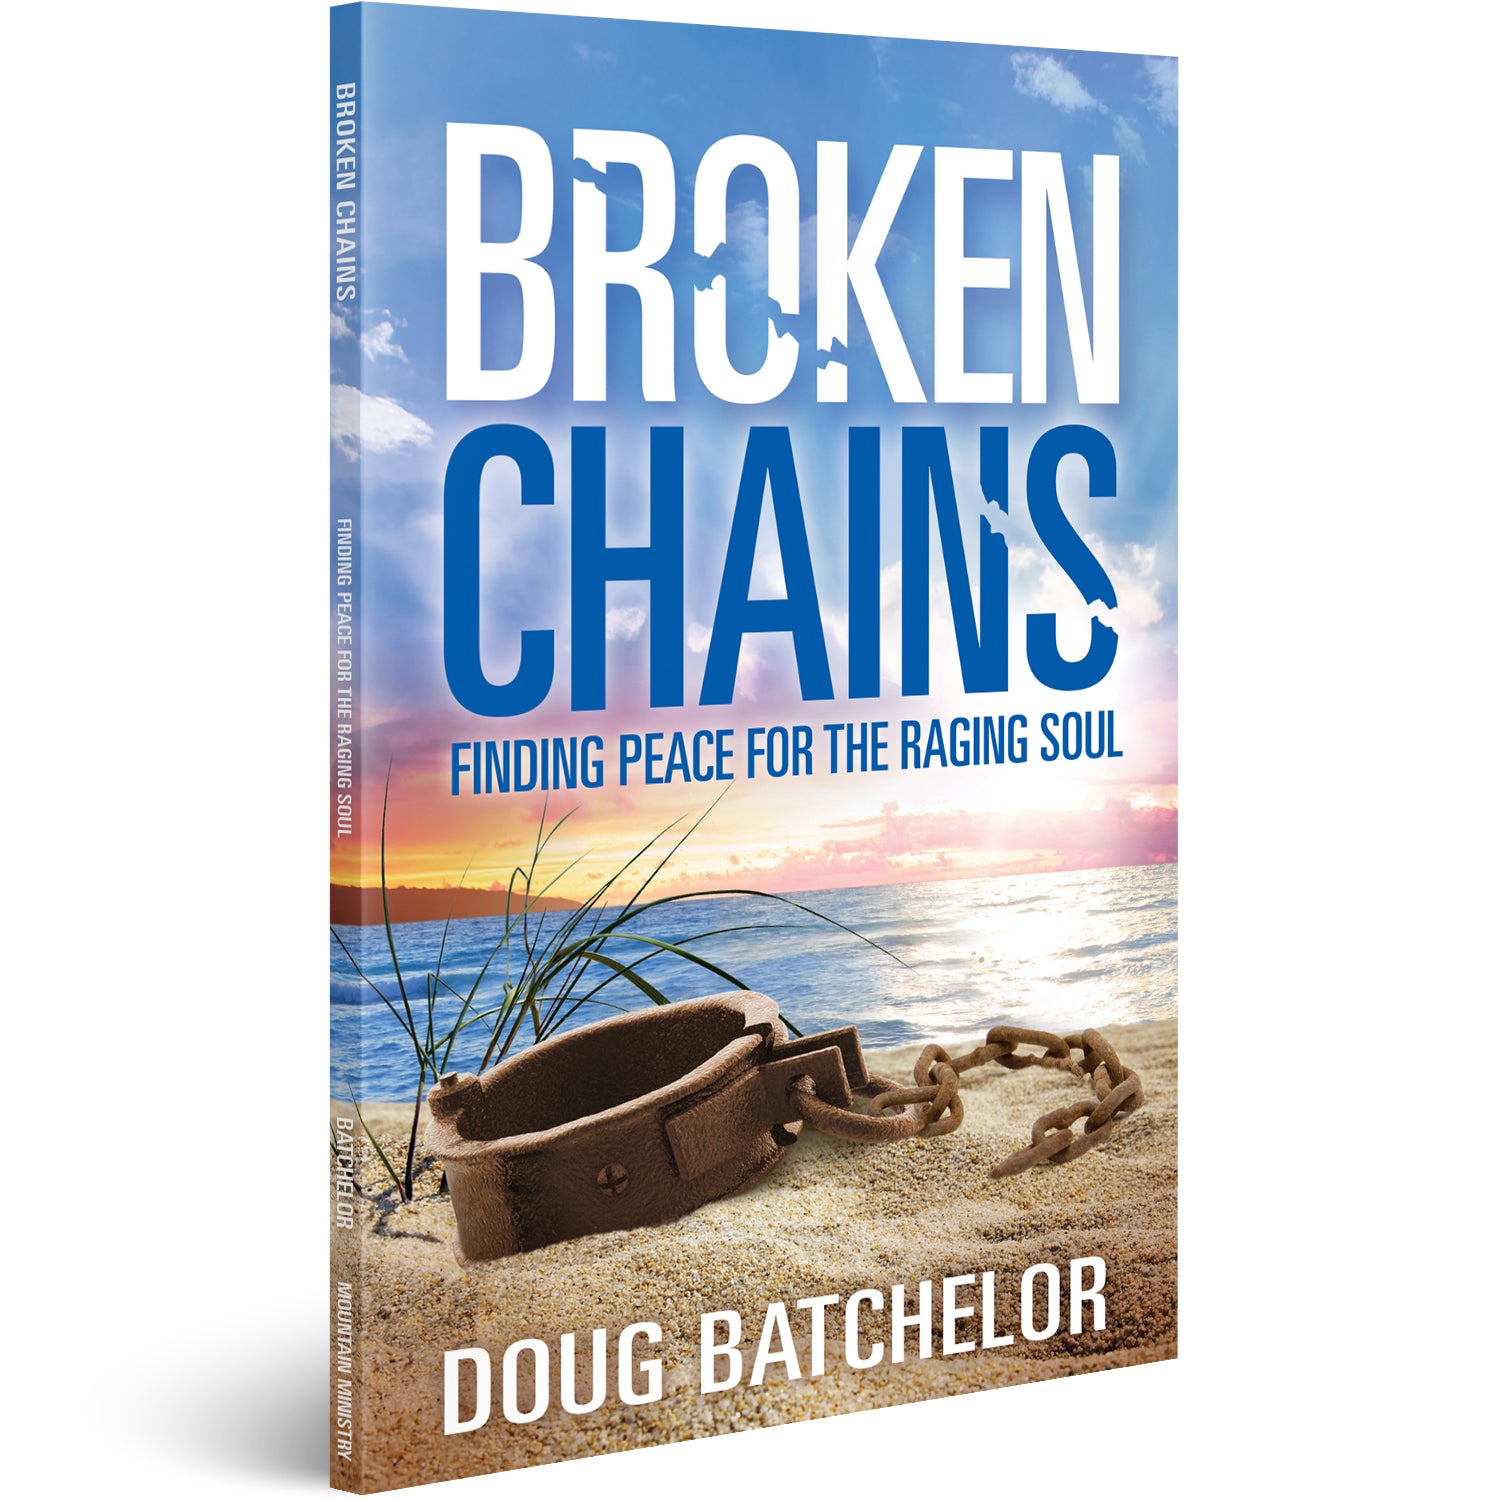 Broken Chains: Finding Peace for the Raging Soul